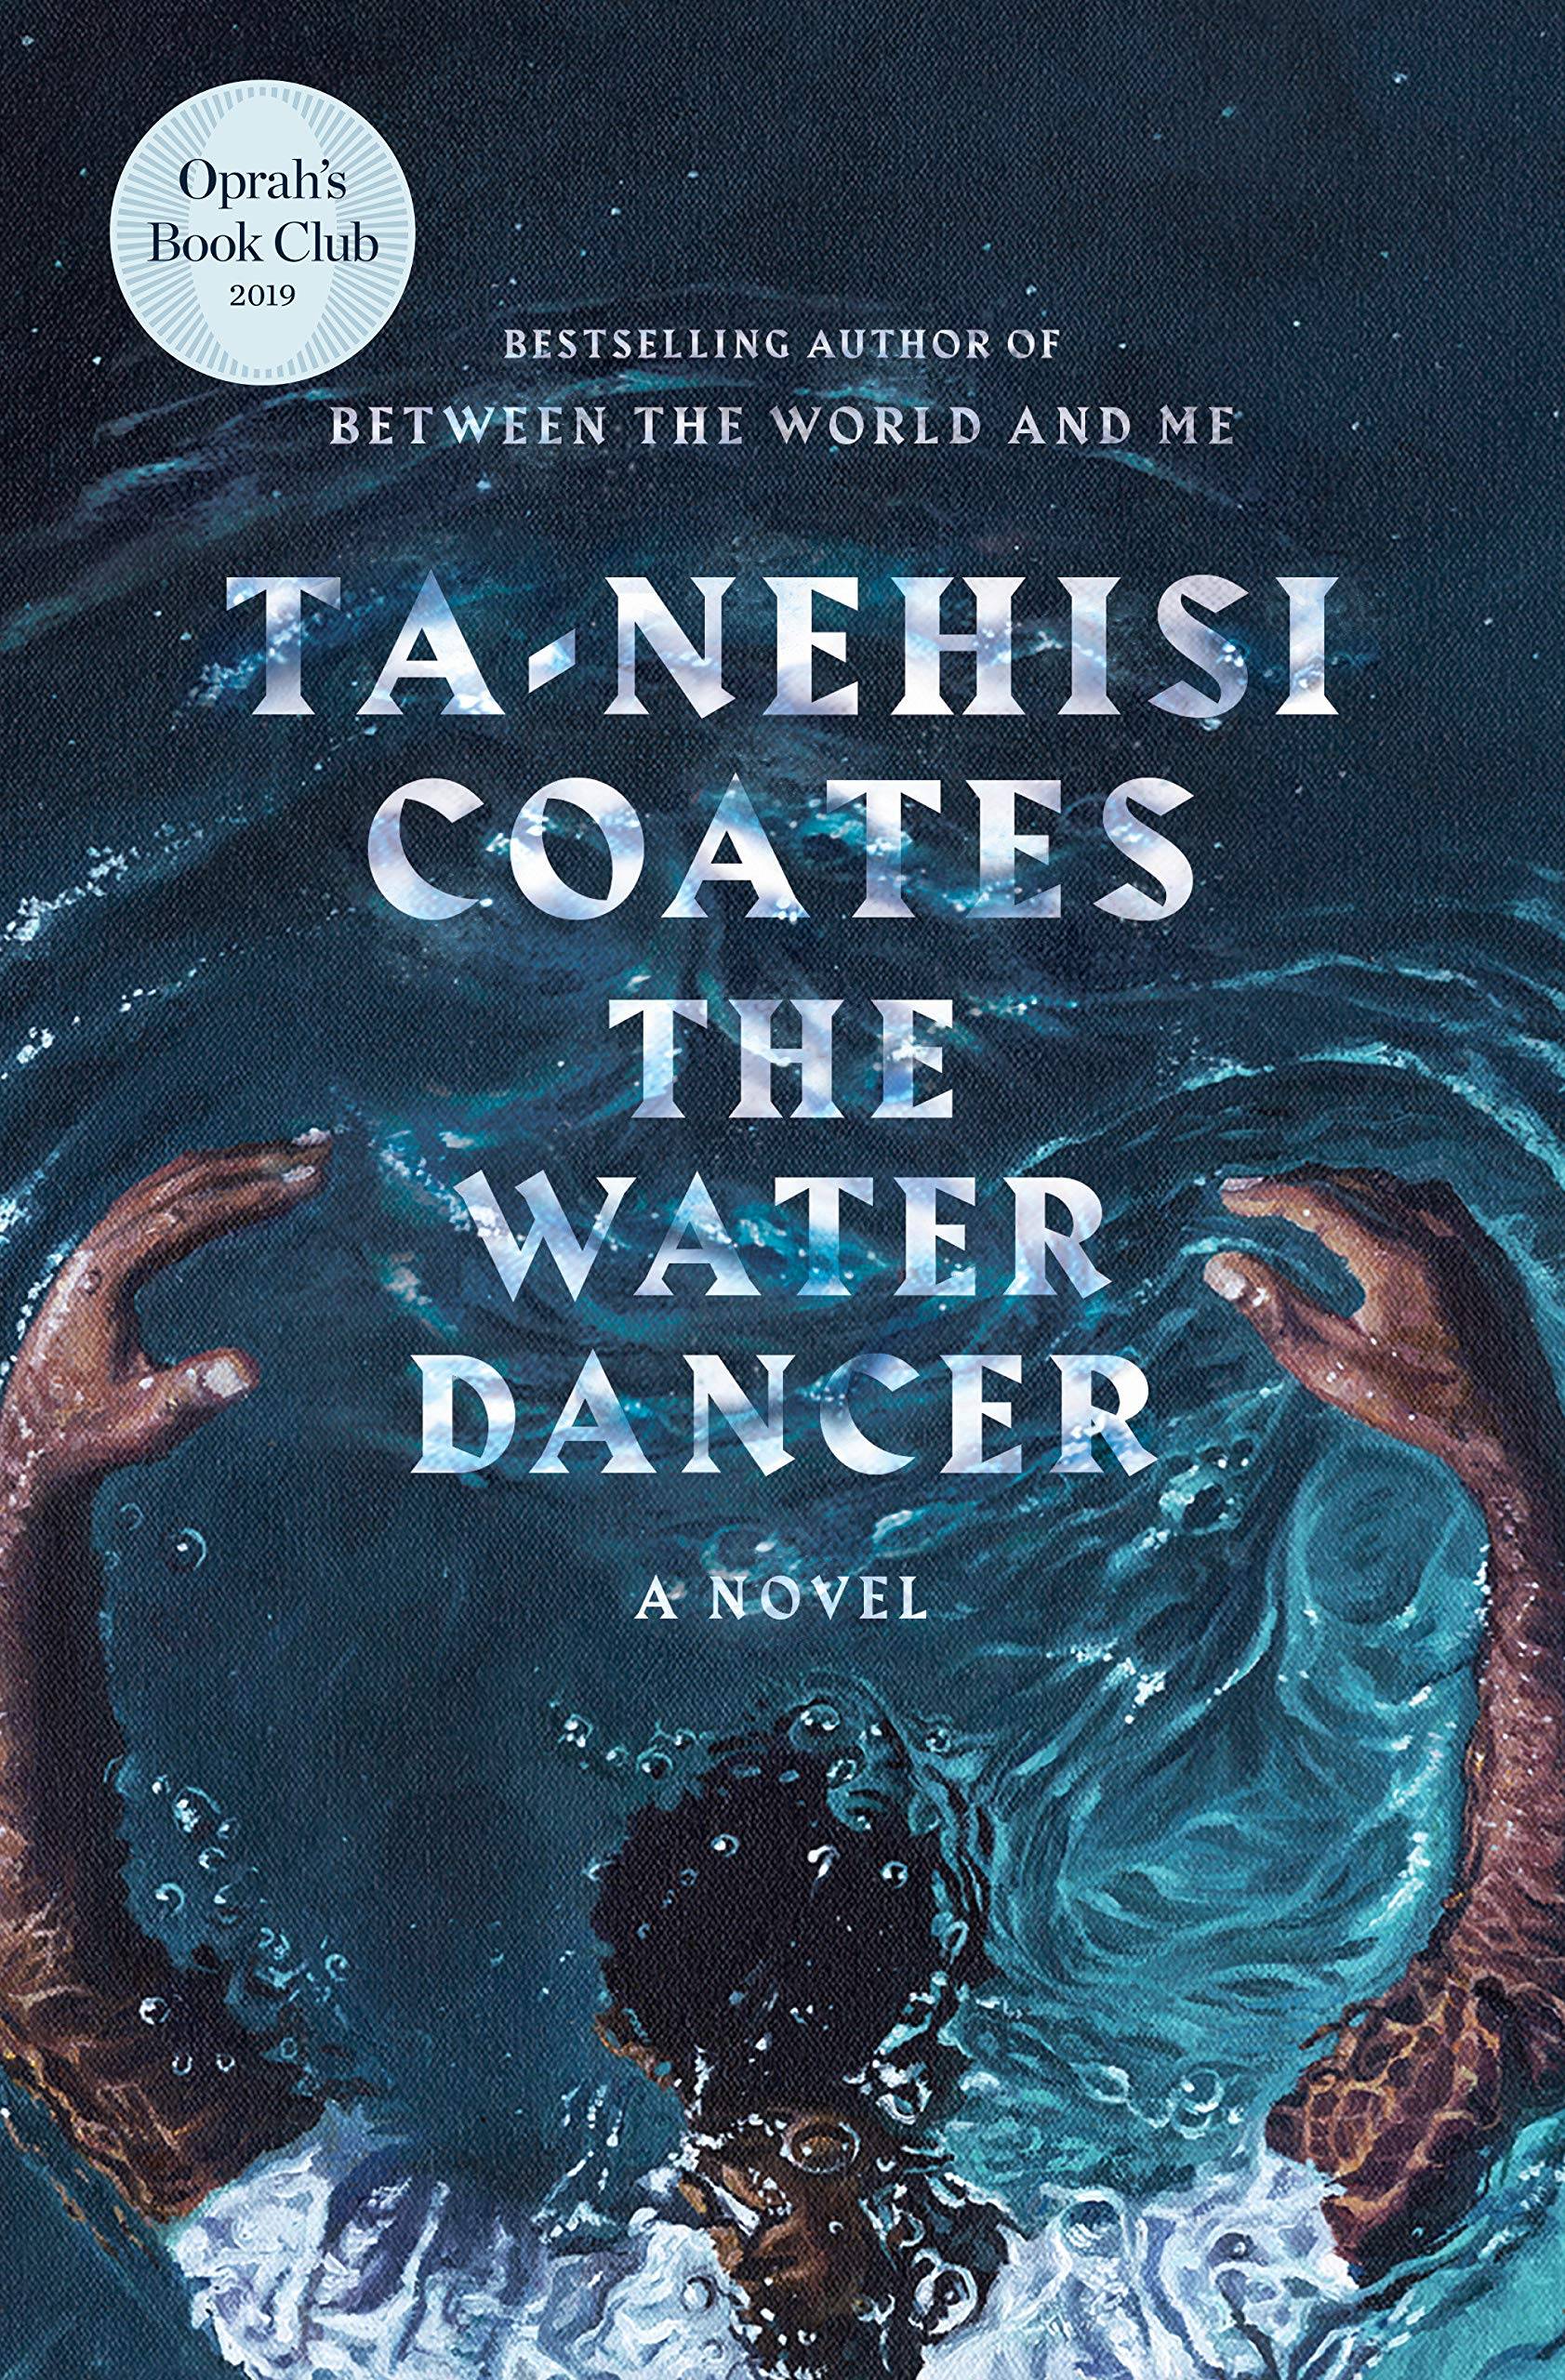 Book cover featuring the image of a black person with their arms up making ripples in water